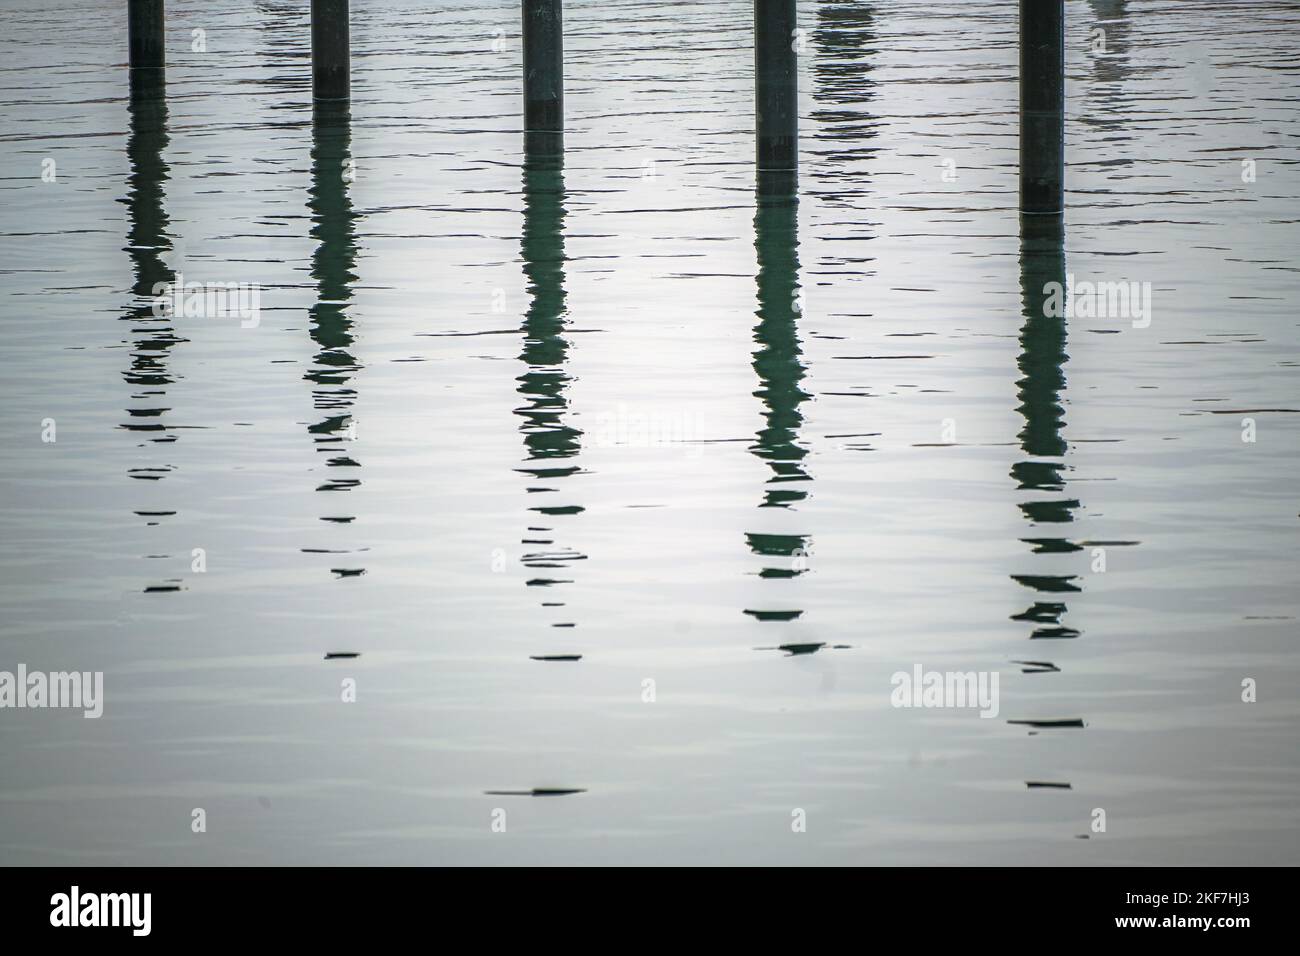 Black mooring piles or dolphins with reflection in the water in an empty yacht marina on the Baltic Sea on a gray November day, abstract image, nearly Stock Photo